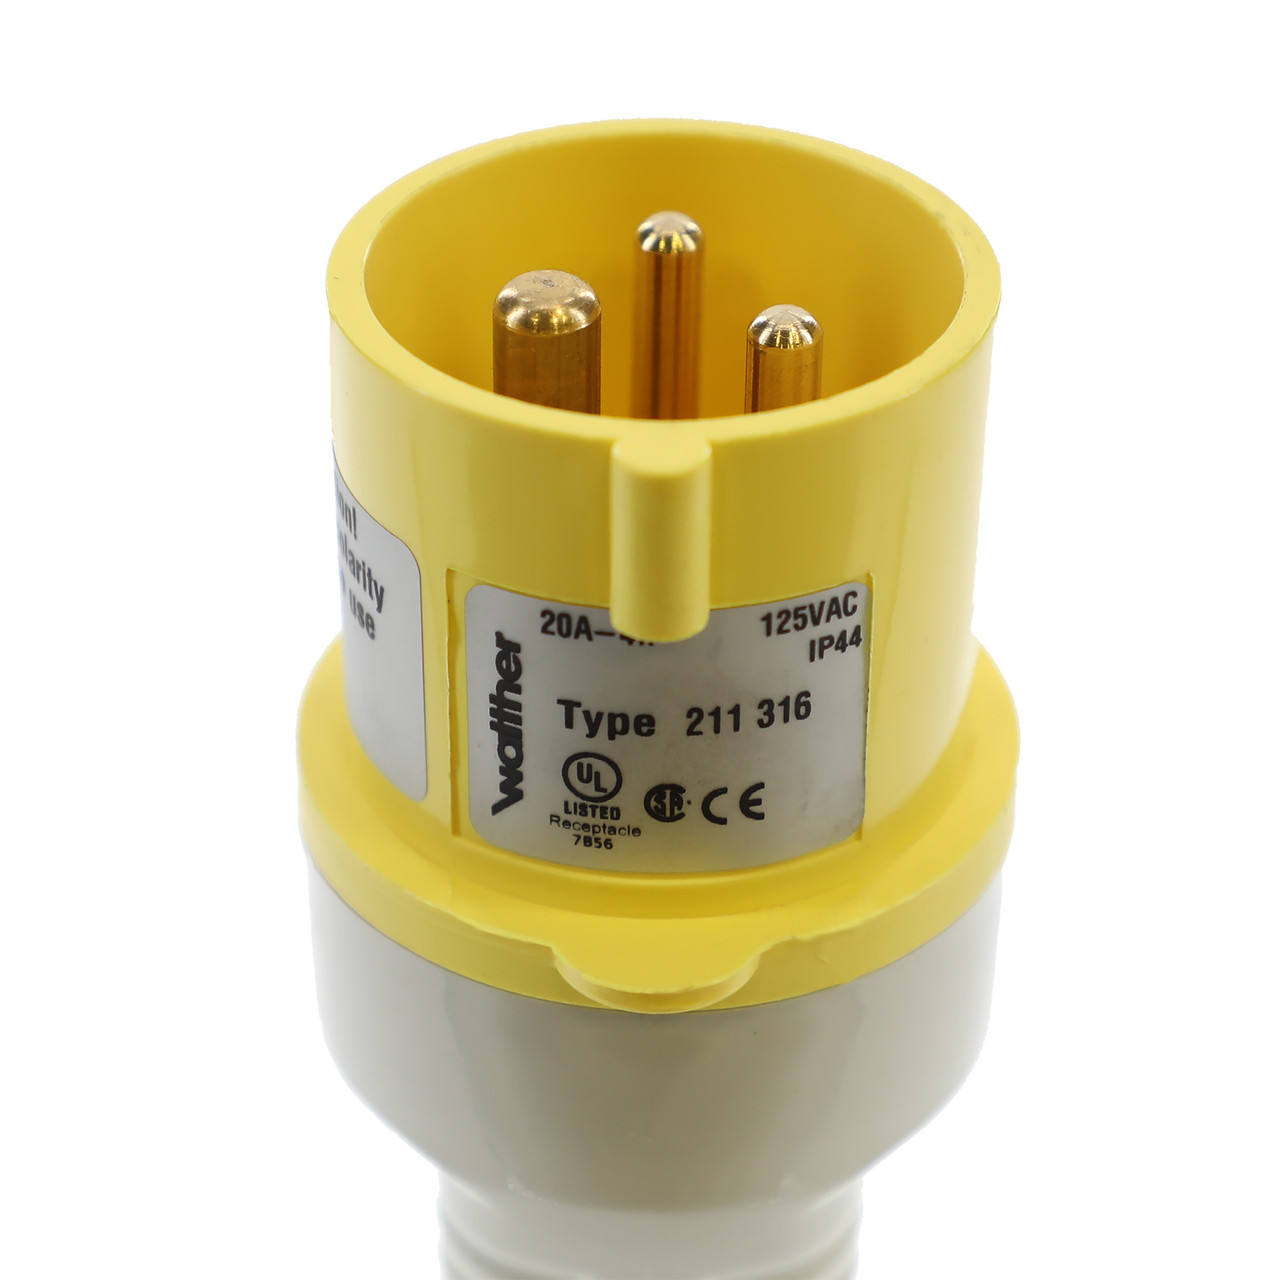 Walther Electric 211316 Pin and Sleeve Plug 20A 3 Wire 125 VAC 4Hr IP44  Splashproof - 320P4 Industrial Grade IEC (Yellow)